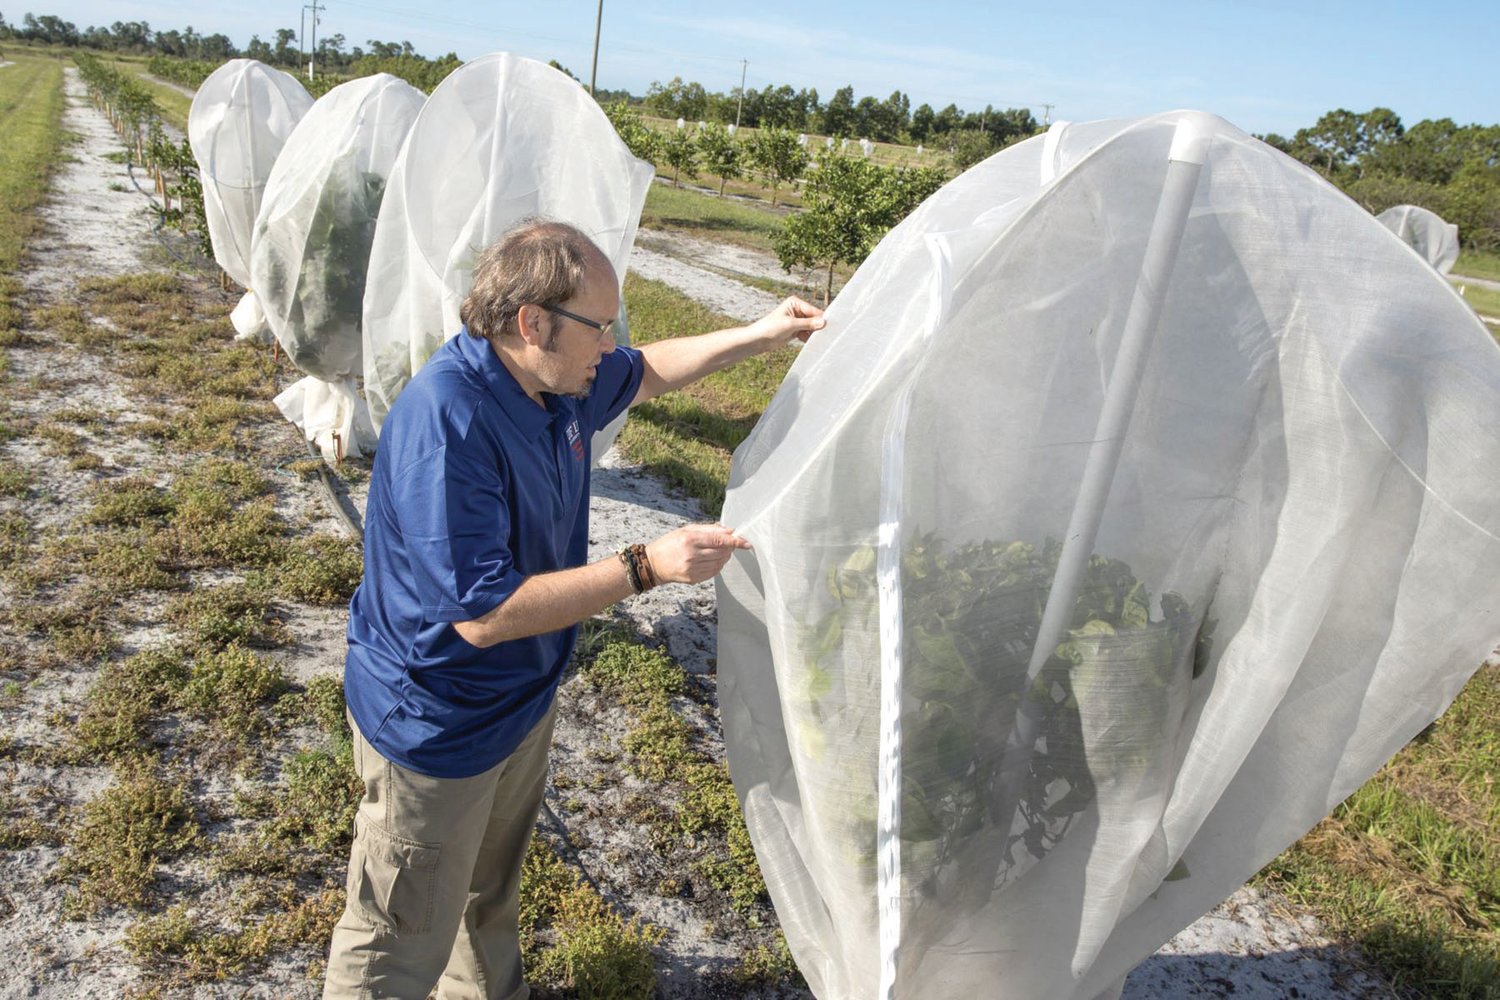 Dr. Fernando Alferez is tending to mesh covers protecting individual citrus trees at the UF/IFAS Southwest Florida Research and Education Center in Immokalee.